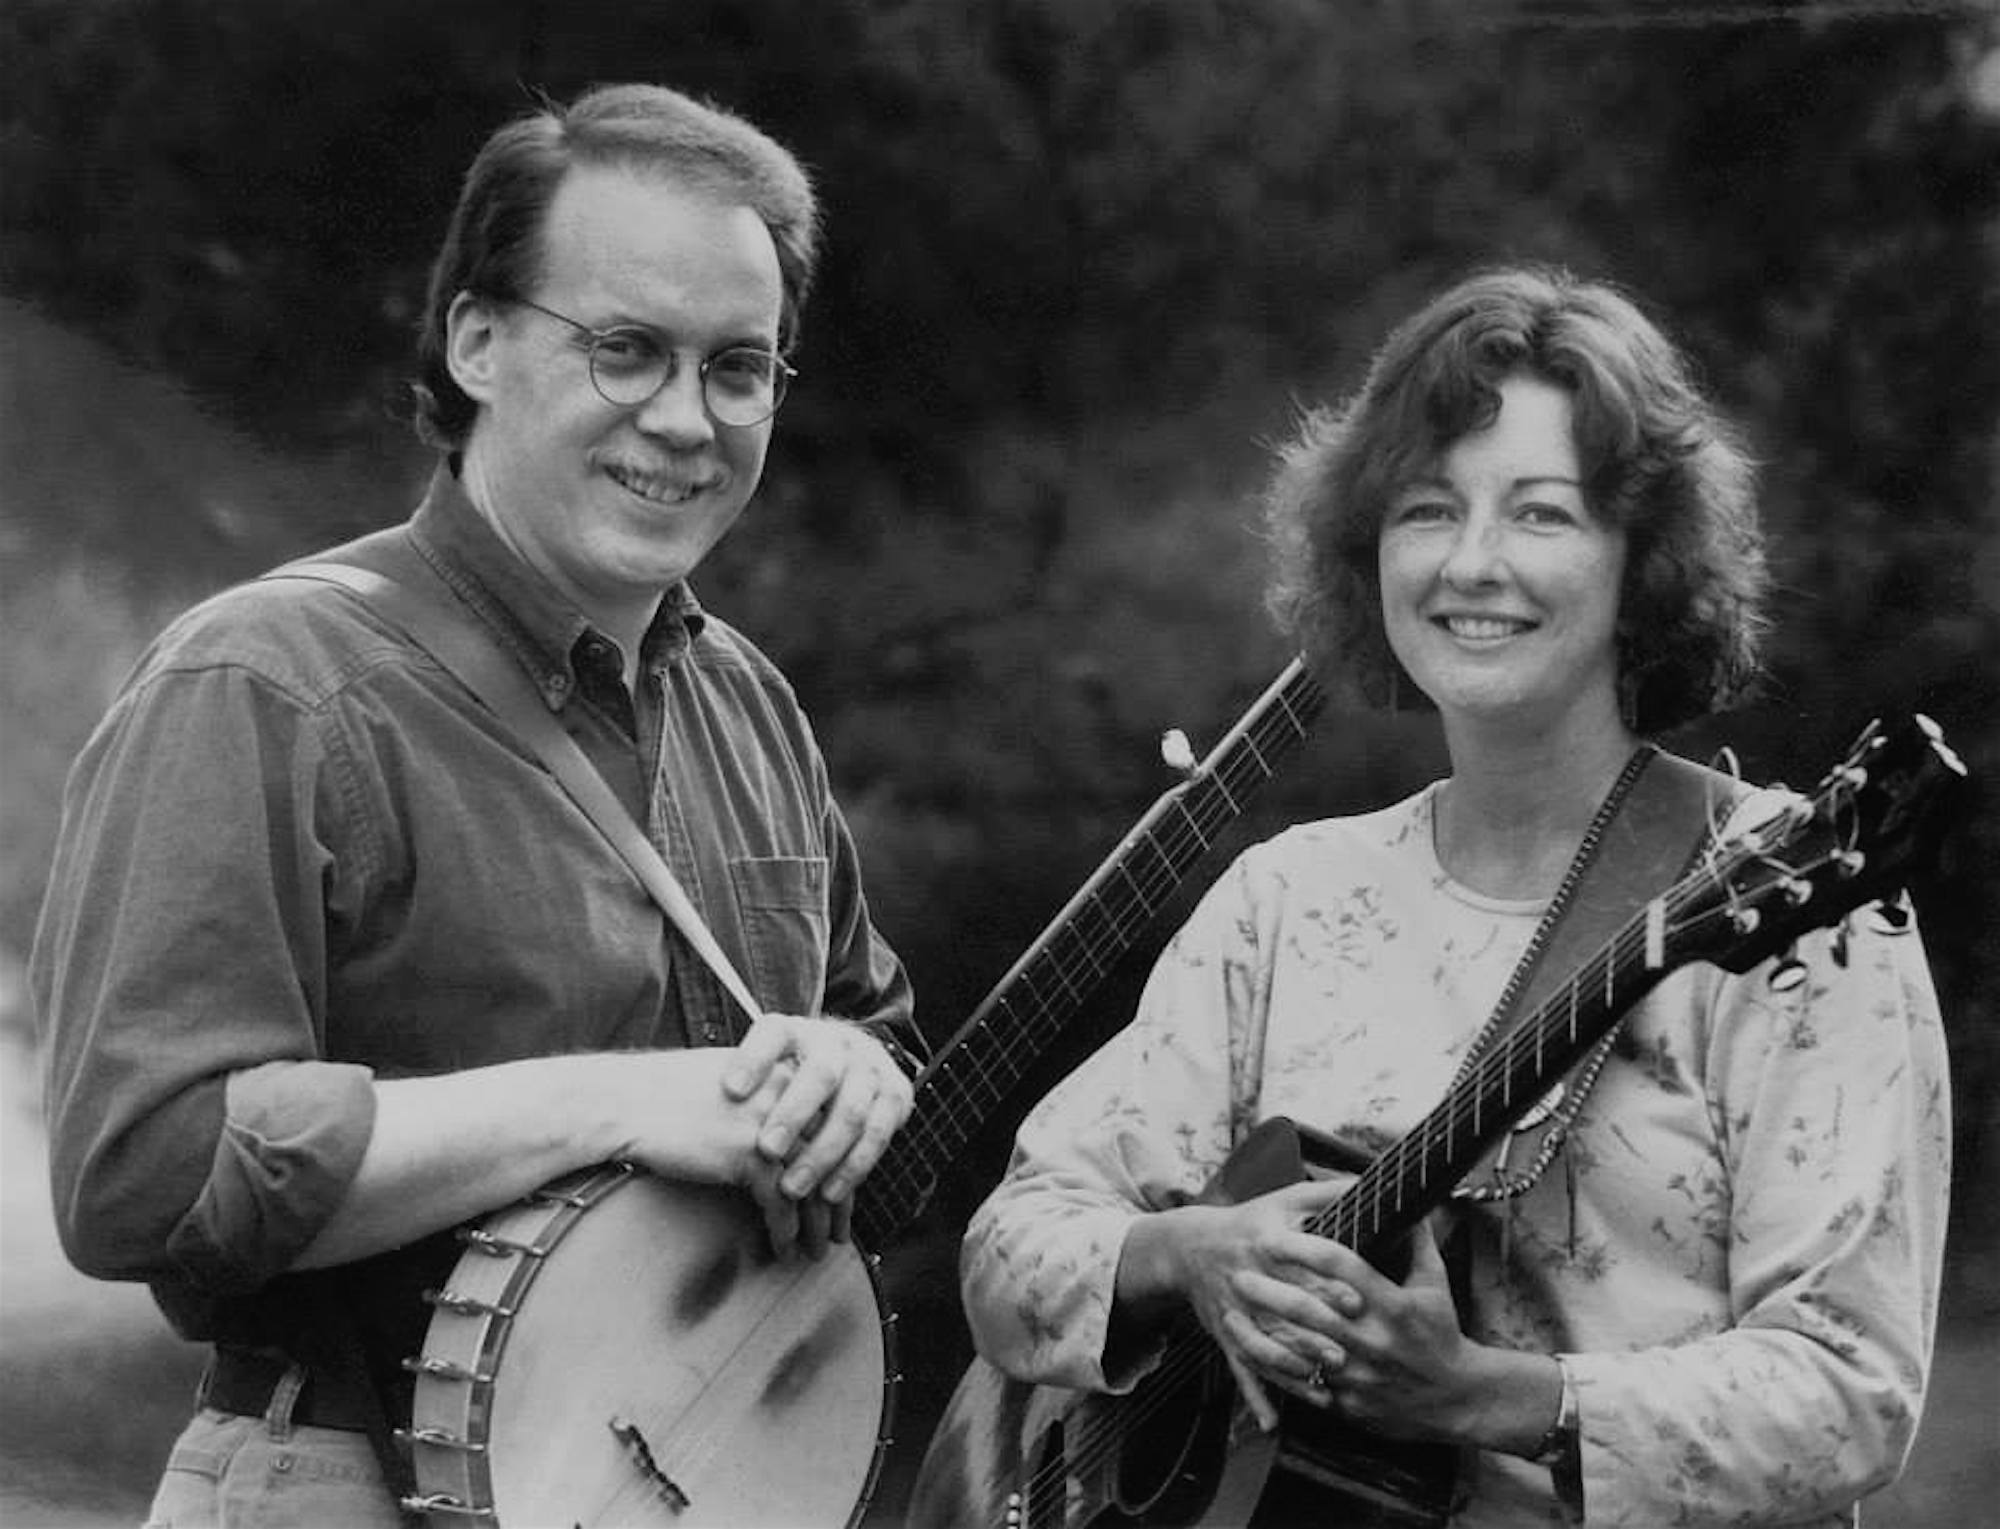 Dan Berggren and Peggy Lynn stand with their instruments